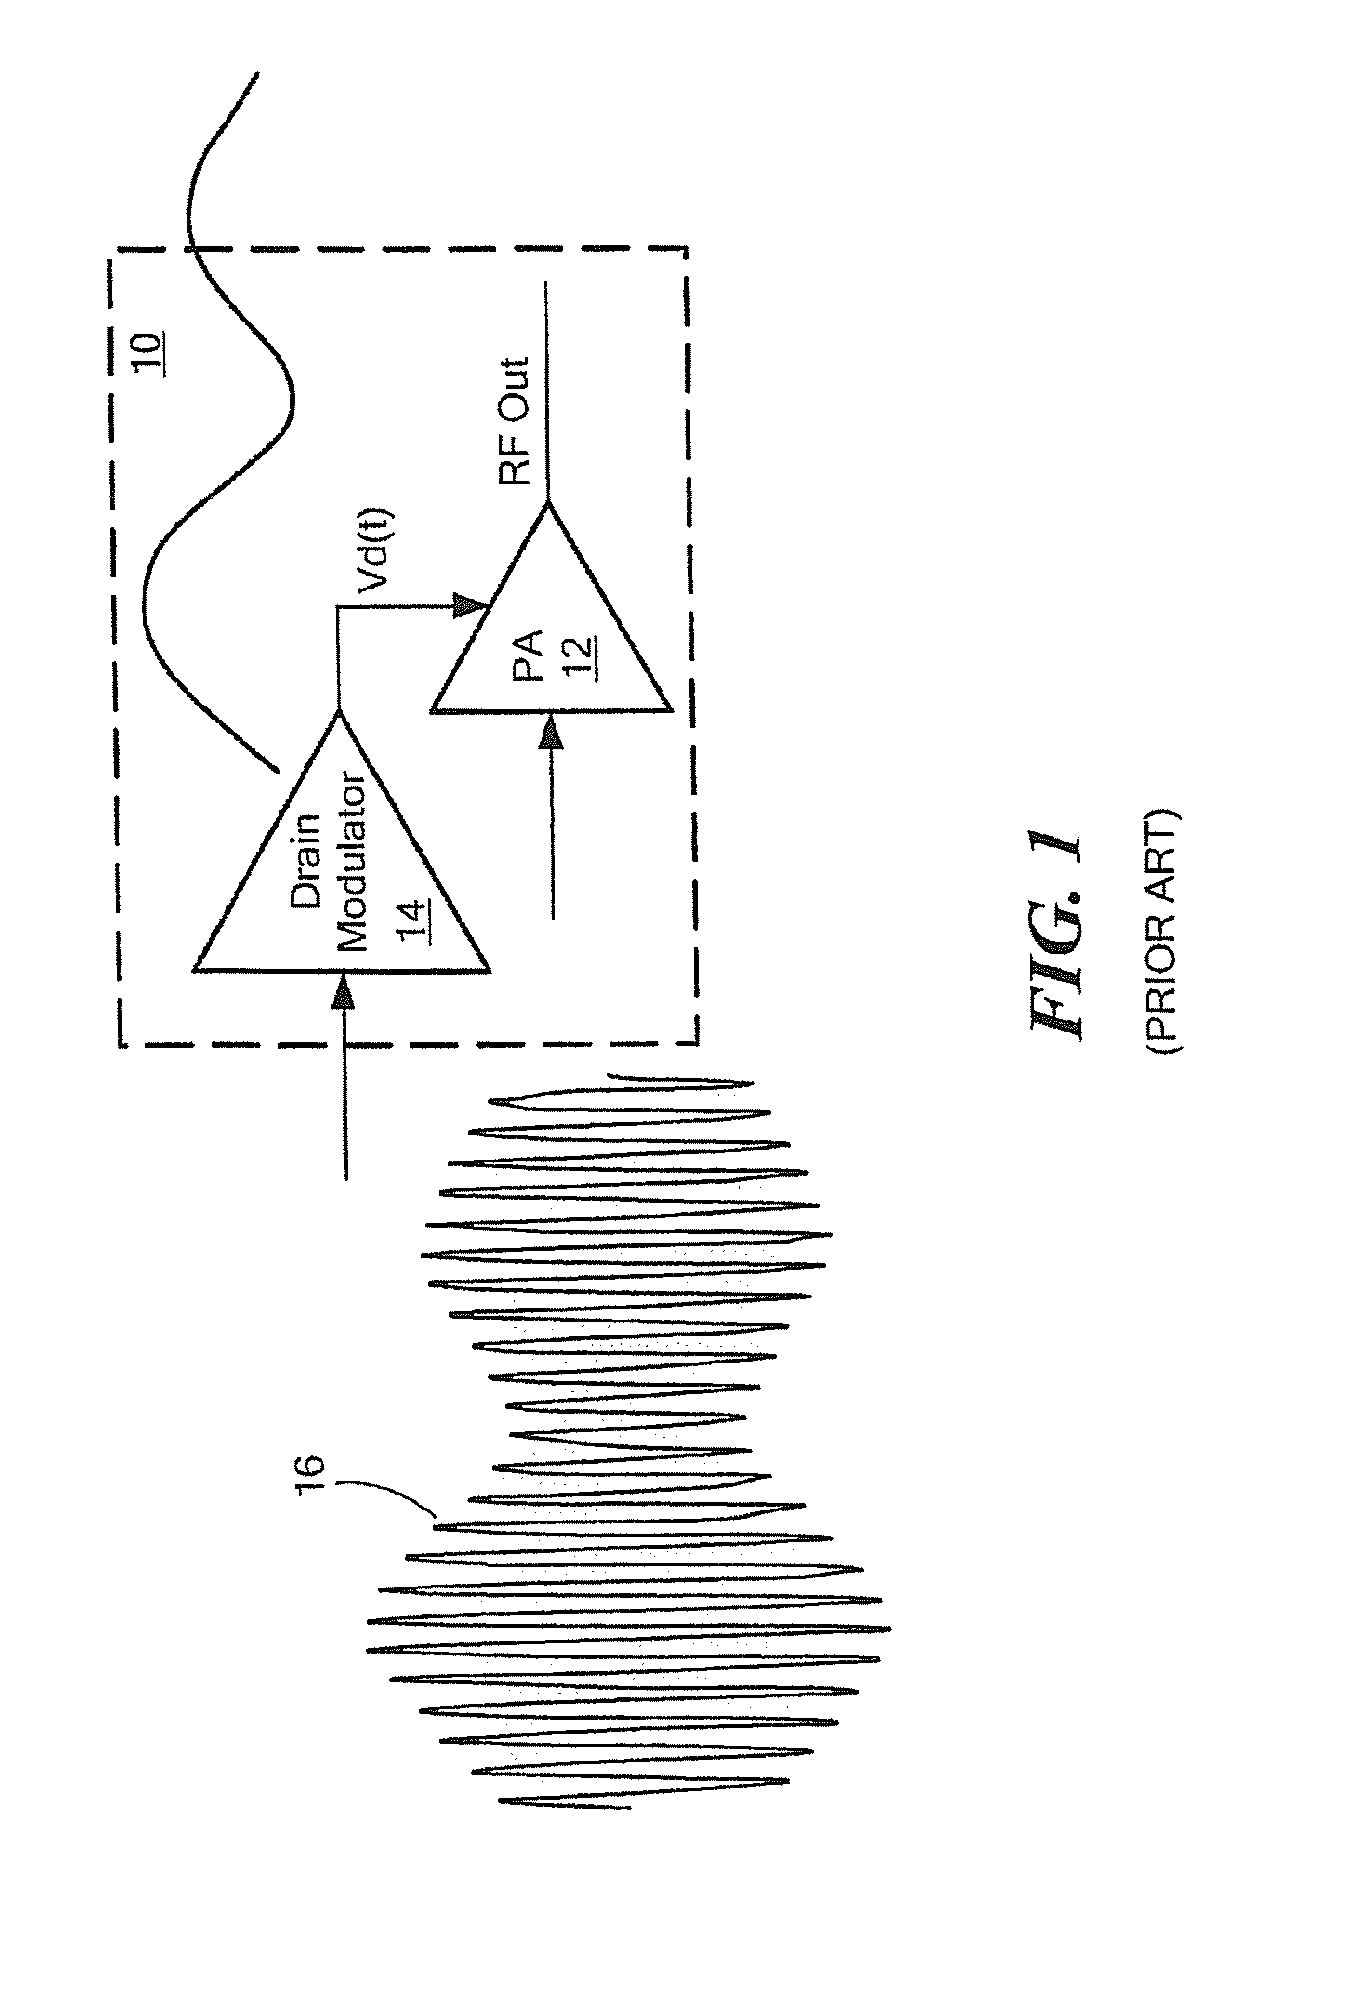 Radio frequency (RF) amplifier utilizing a predistortion circuit and related techniques